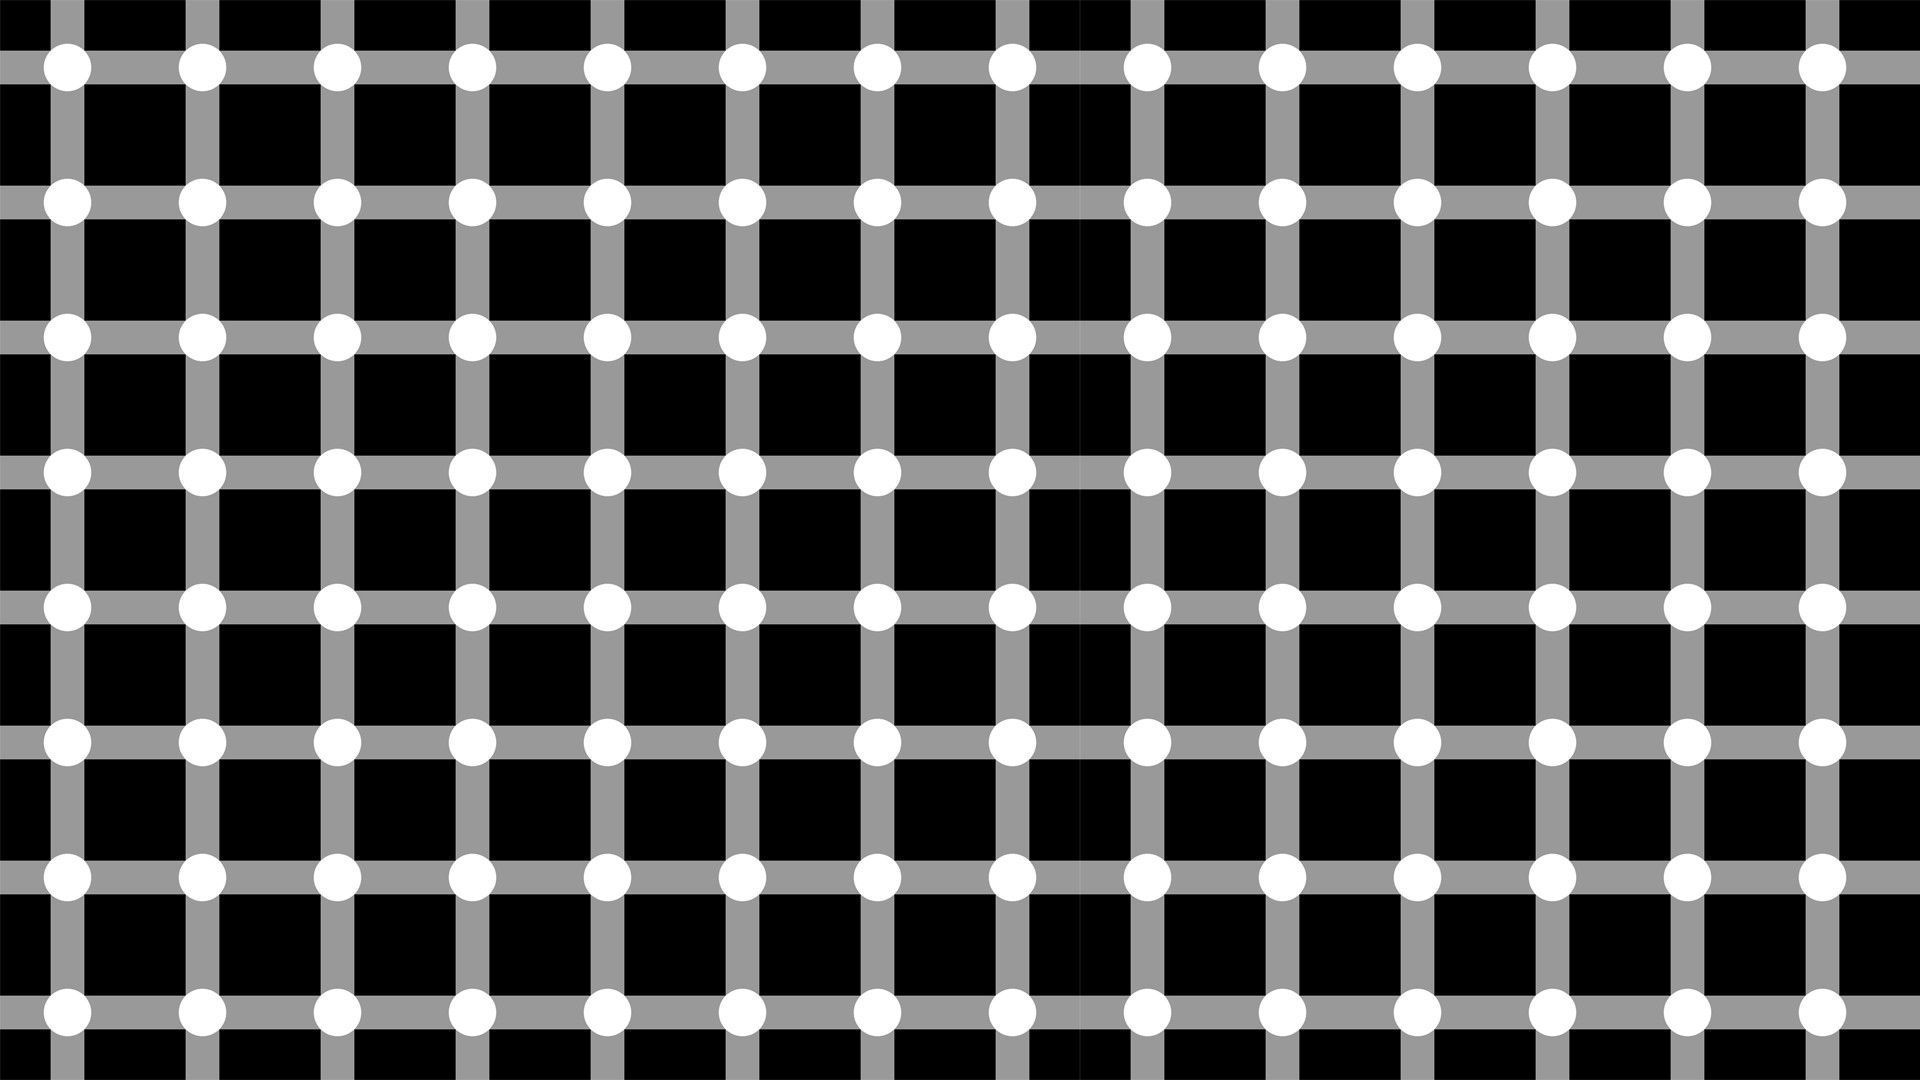 Patterns textures grid illusions grayscale optical illusions grid